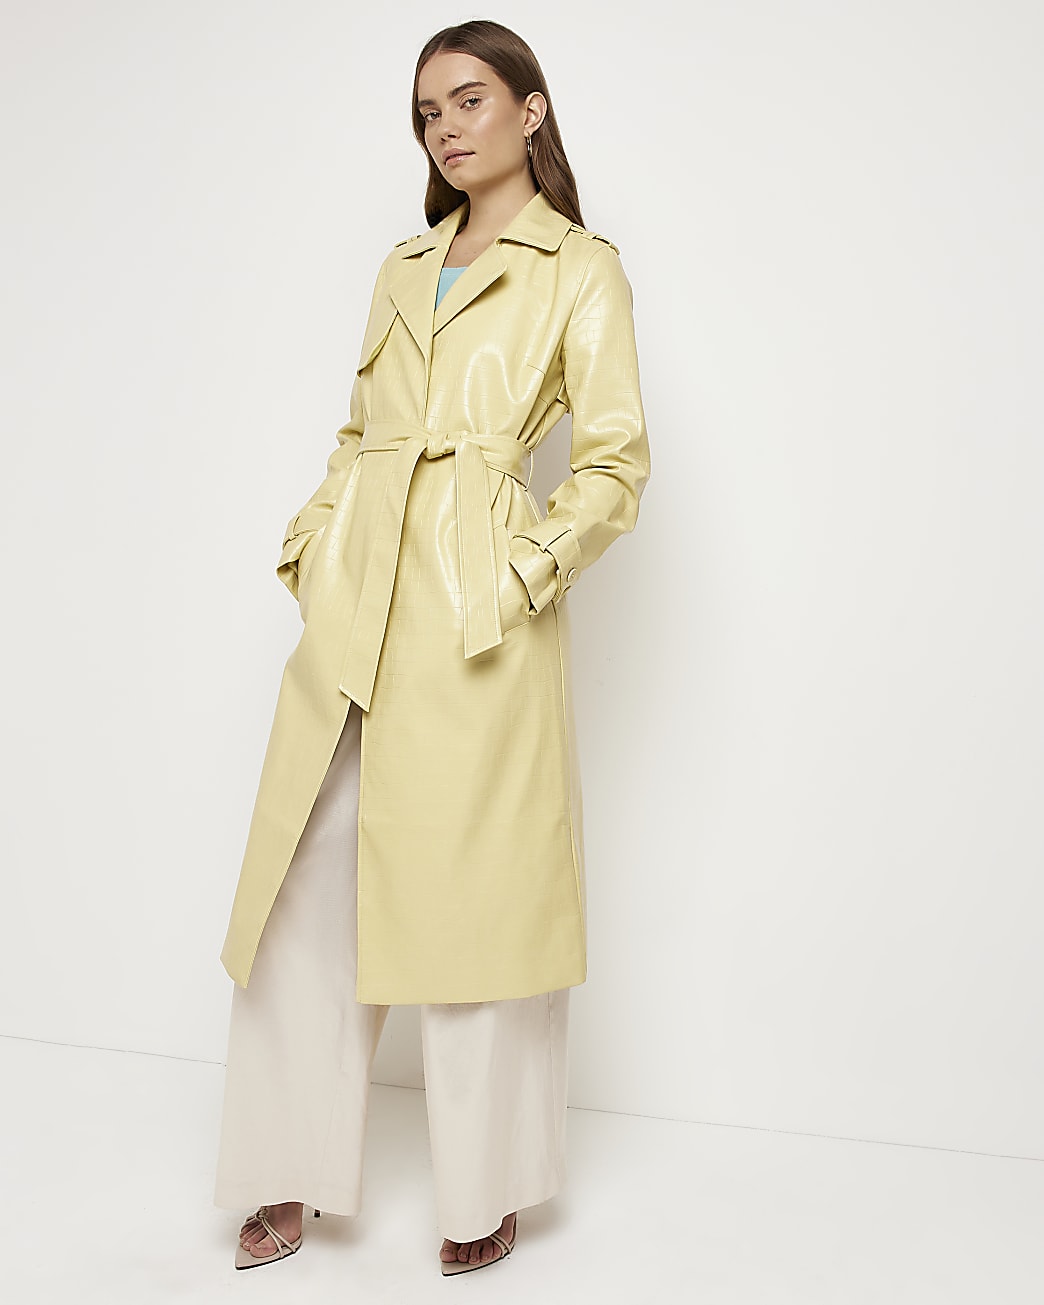 
Yellow Faux Leather Longline Trench Coat, River Island